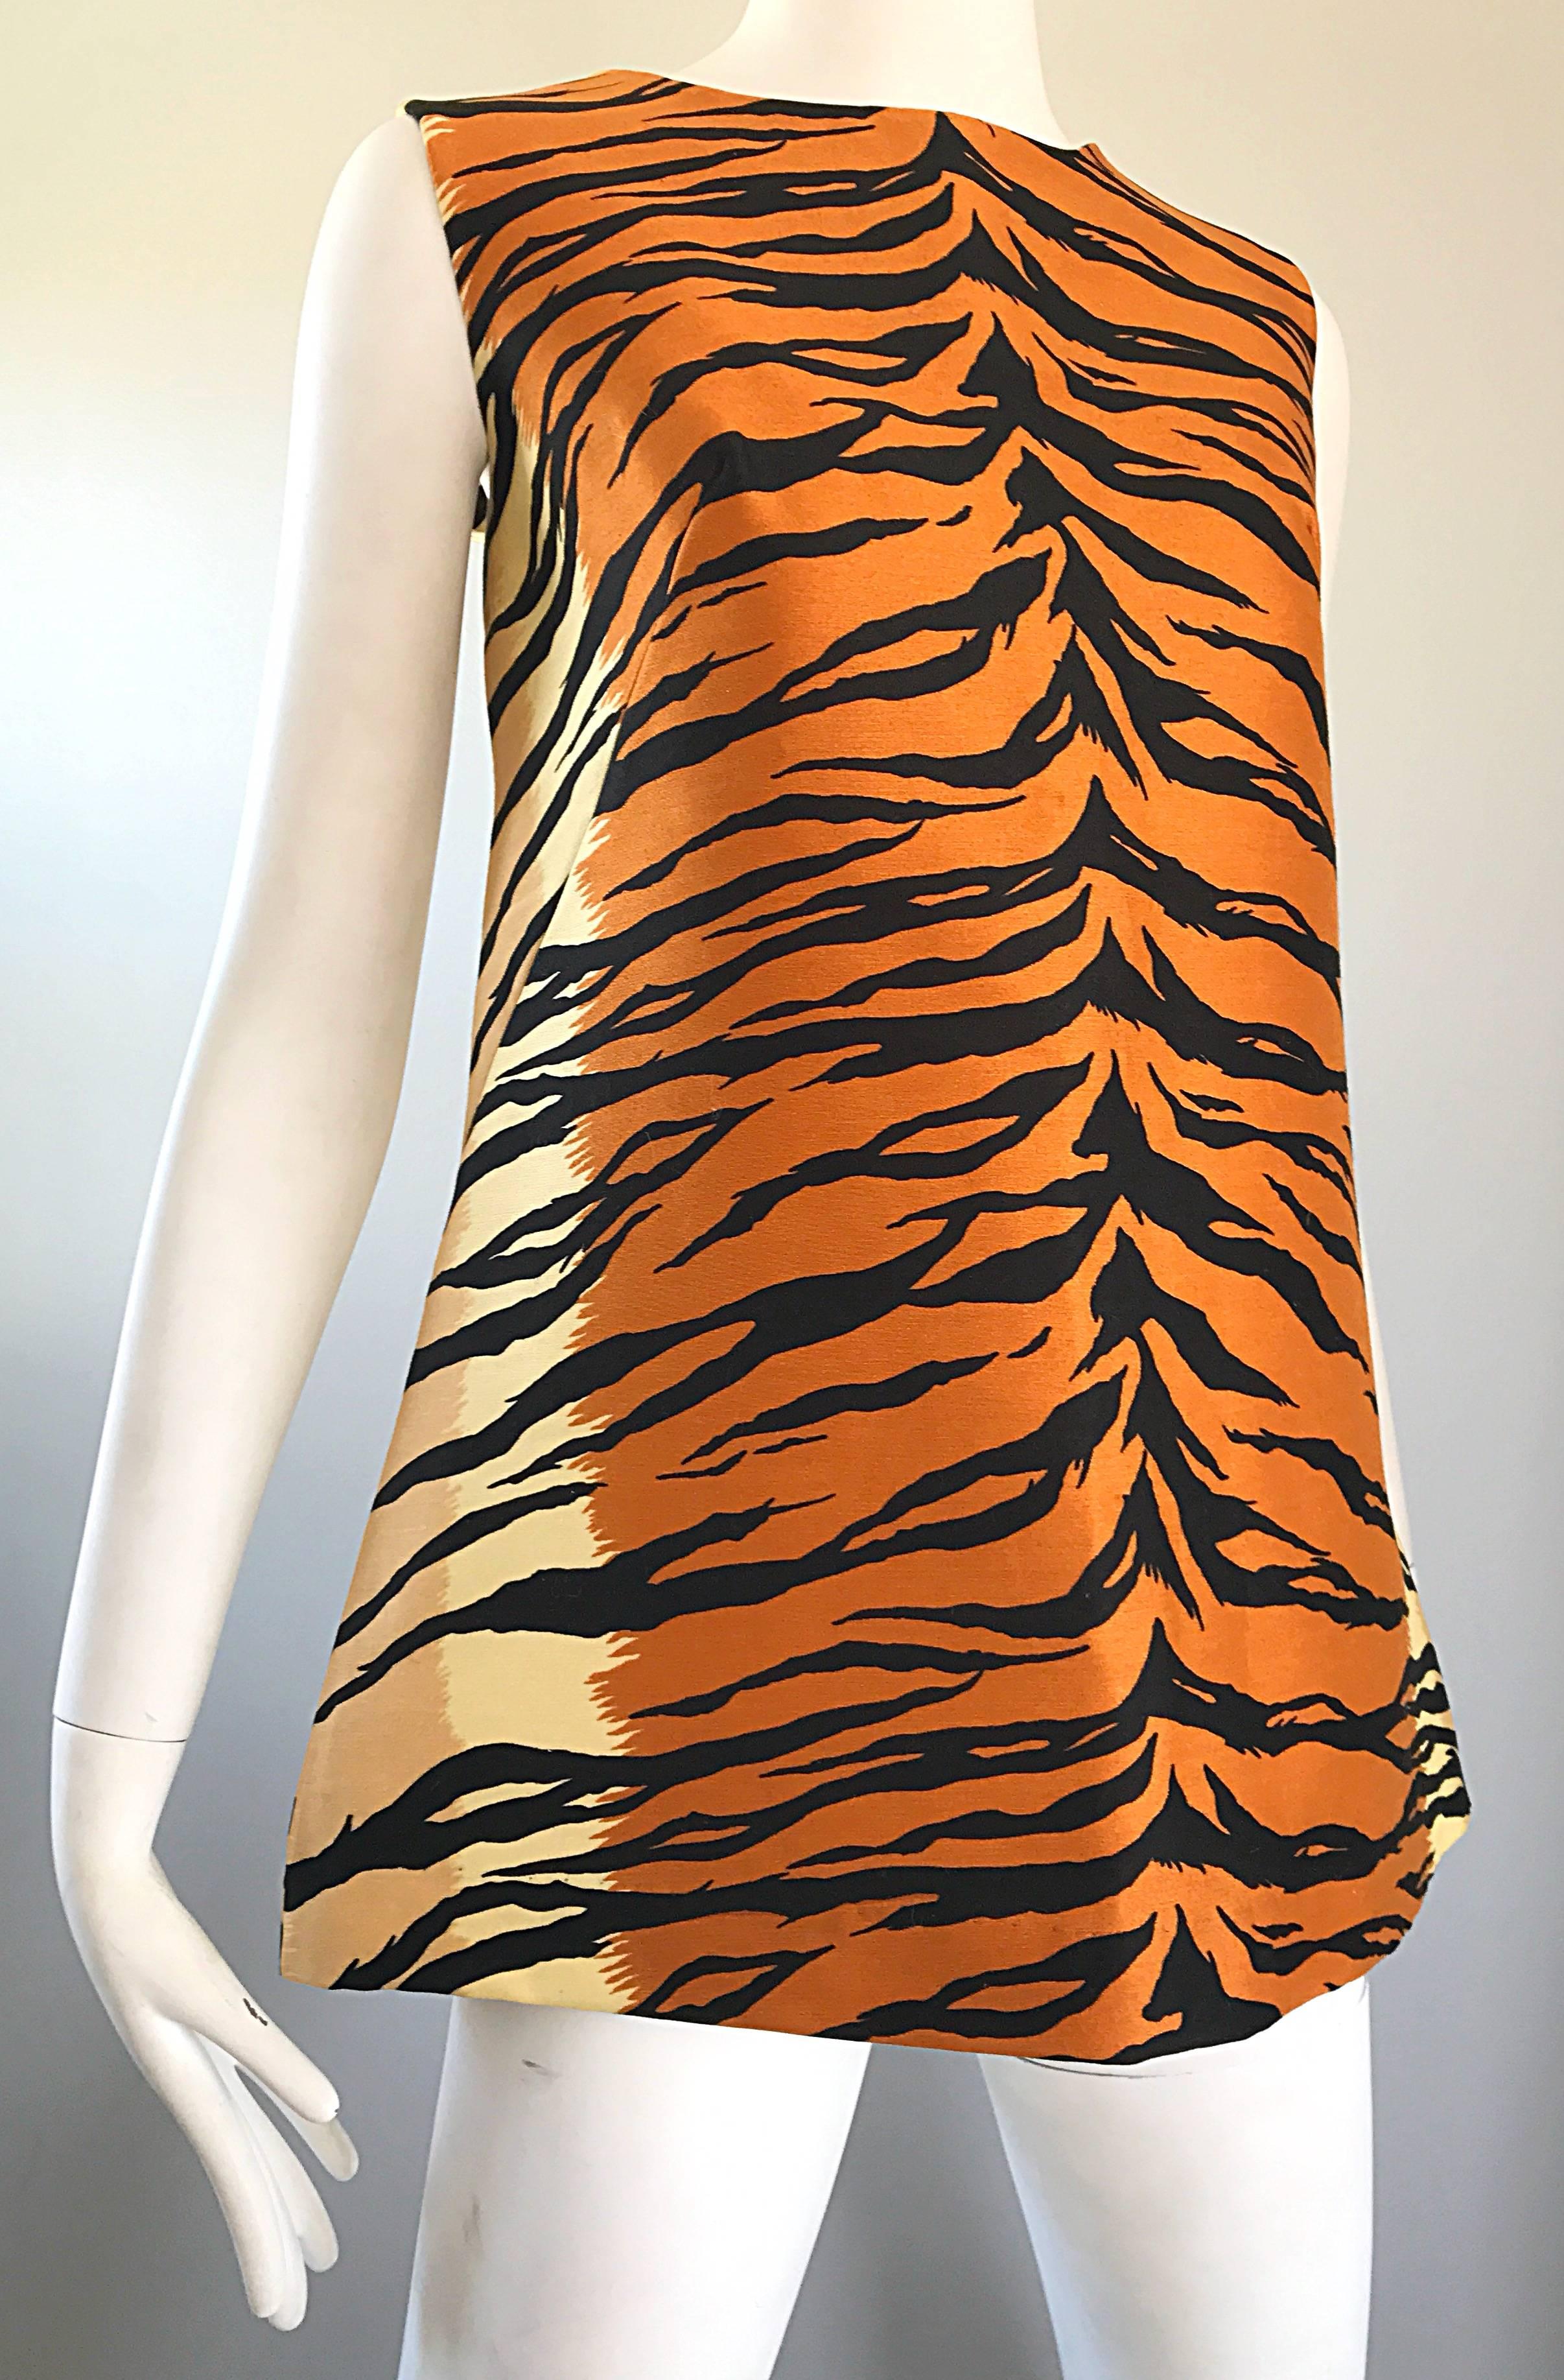 Chic vintage 1960s LADY HATHAWAY for LORD & TAYLOR tiger print sleeveless A line tunic top! Soft silk and cotton blend holds shape nicely. Warm tones of brown, terracotta, sand, ivory and black. Full metal zipper up the back with hook-and-eye